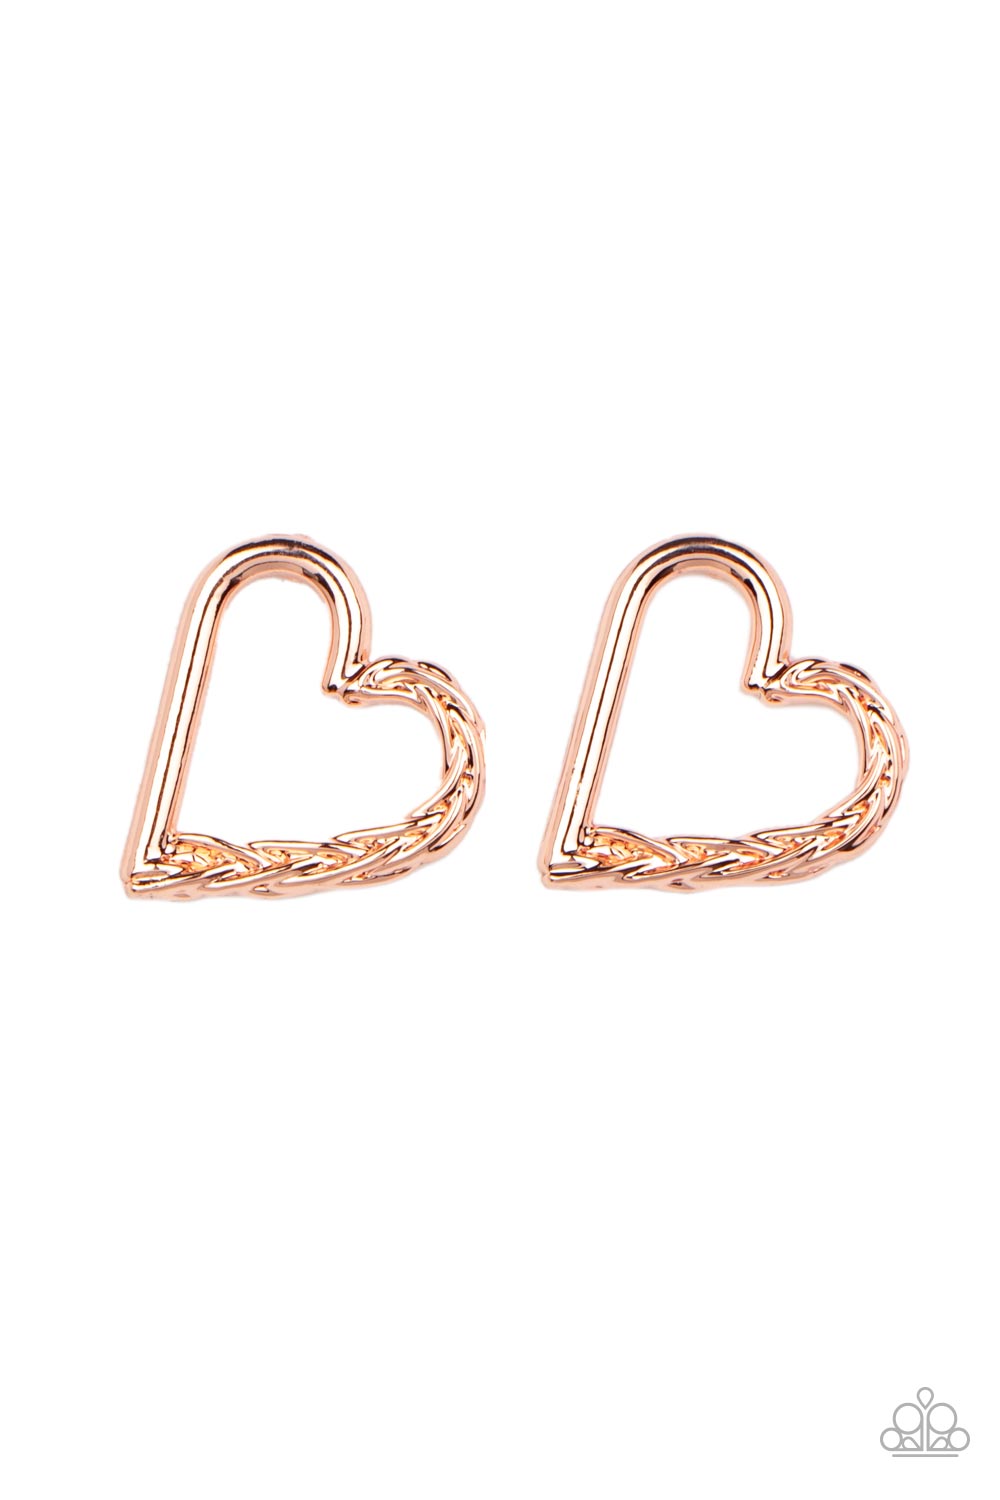 Cupid, Who? - Copper Earrings - Princess Glam Shop